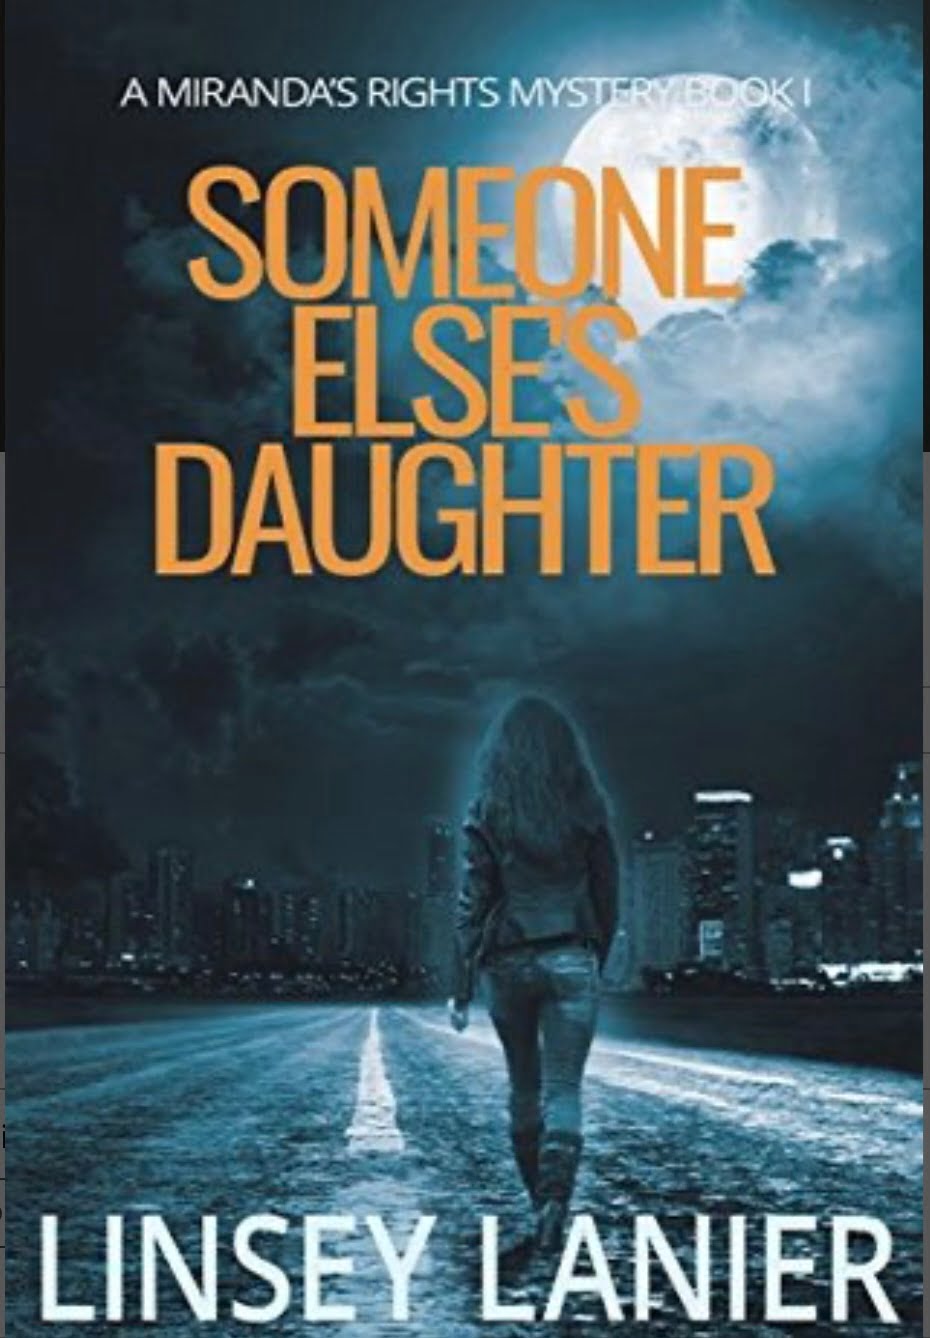 SOMEONE ELSE’S DAUGHTER BY LINSEY LANIER – BOOK REVIEW